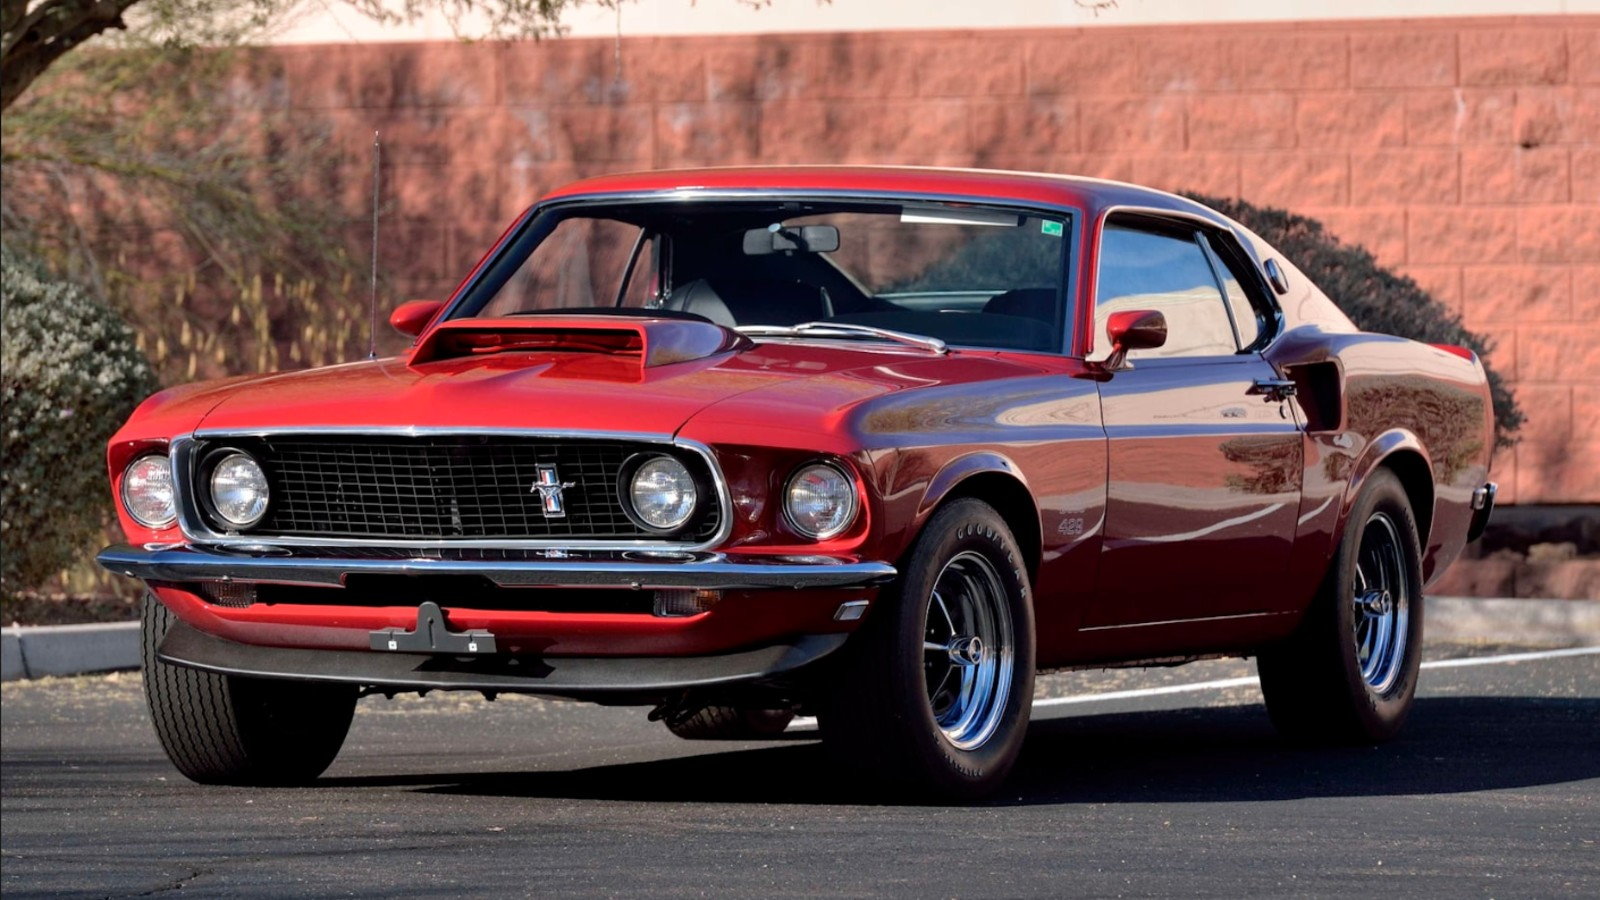 This '69 Mustang Boss 429 is Powered by a NASCAR Engine - The Mustang ...